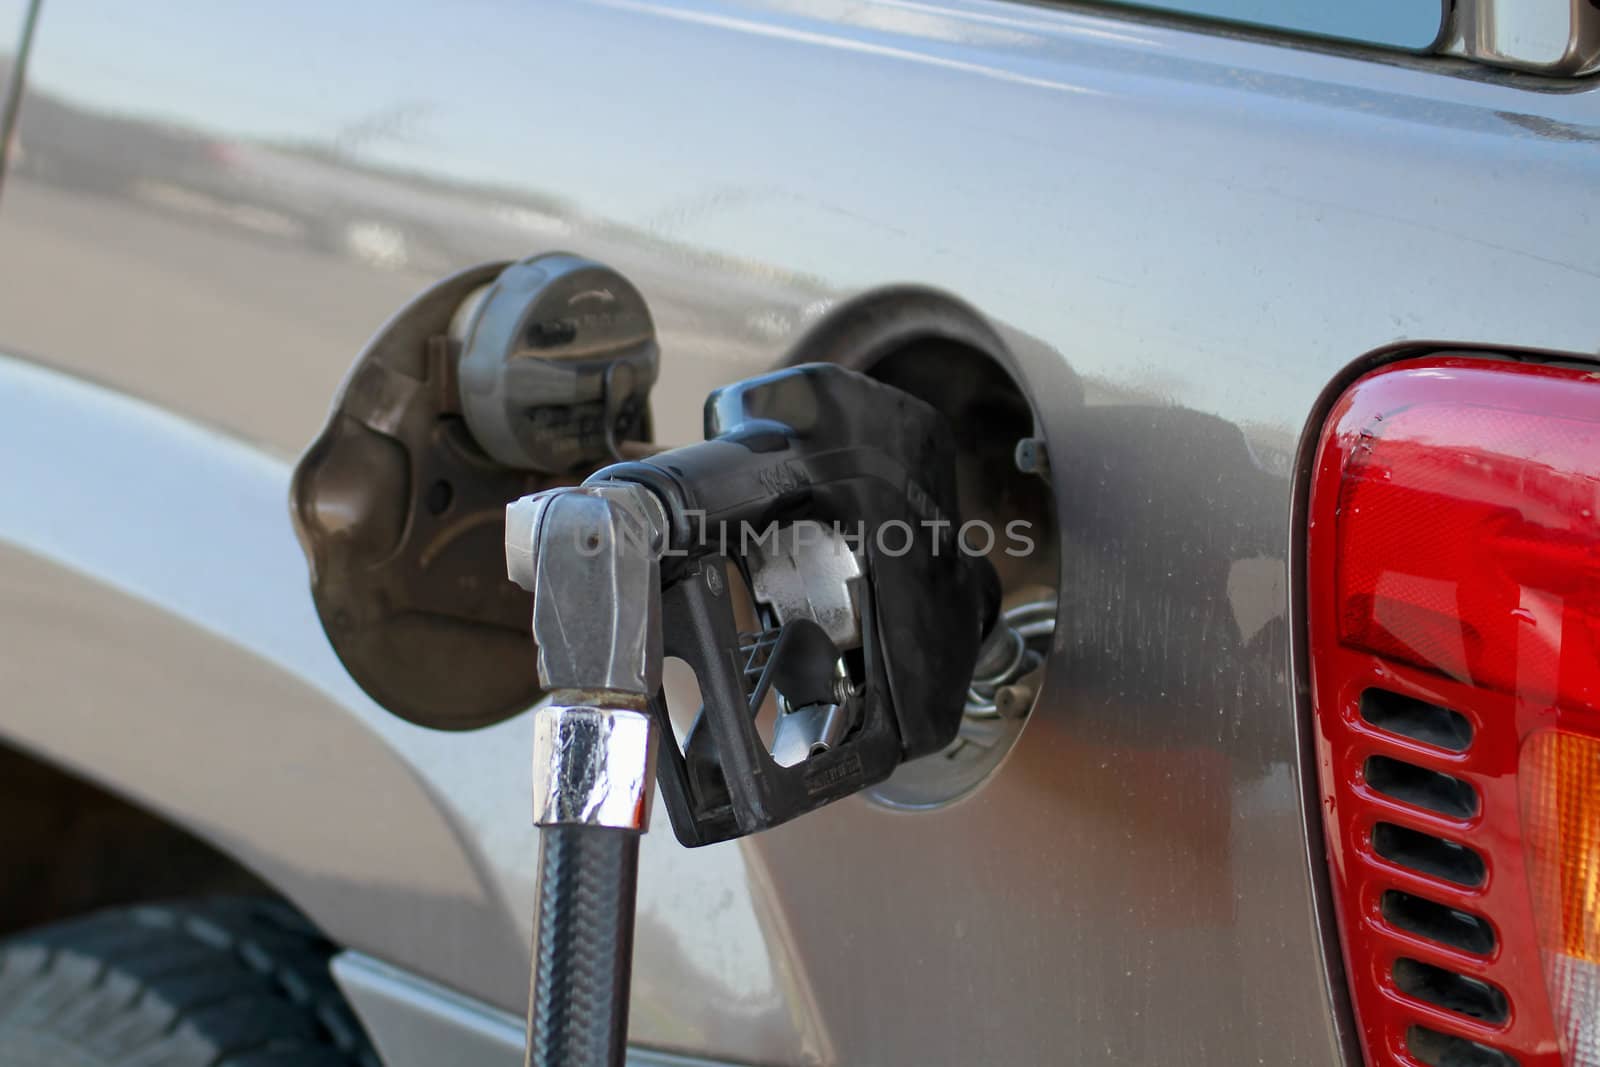 Pump Filling Up the Car Gas Tank 2 by jpldesigns